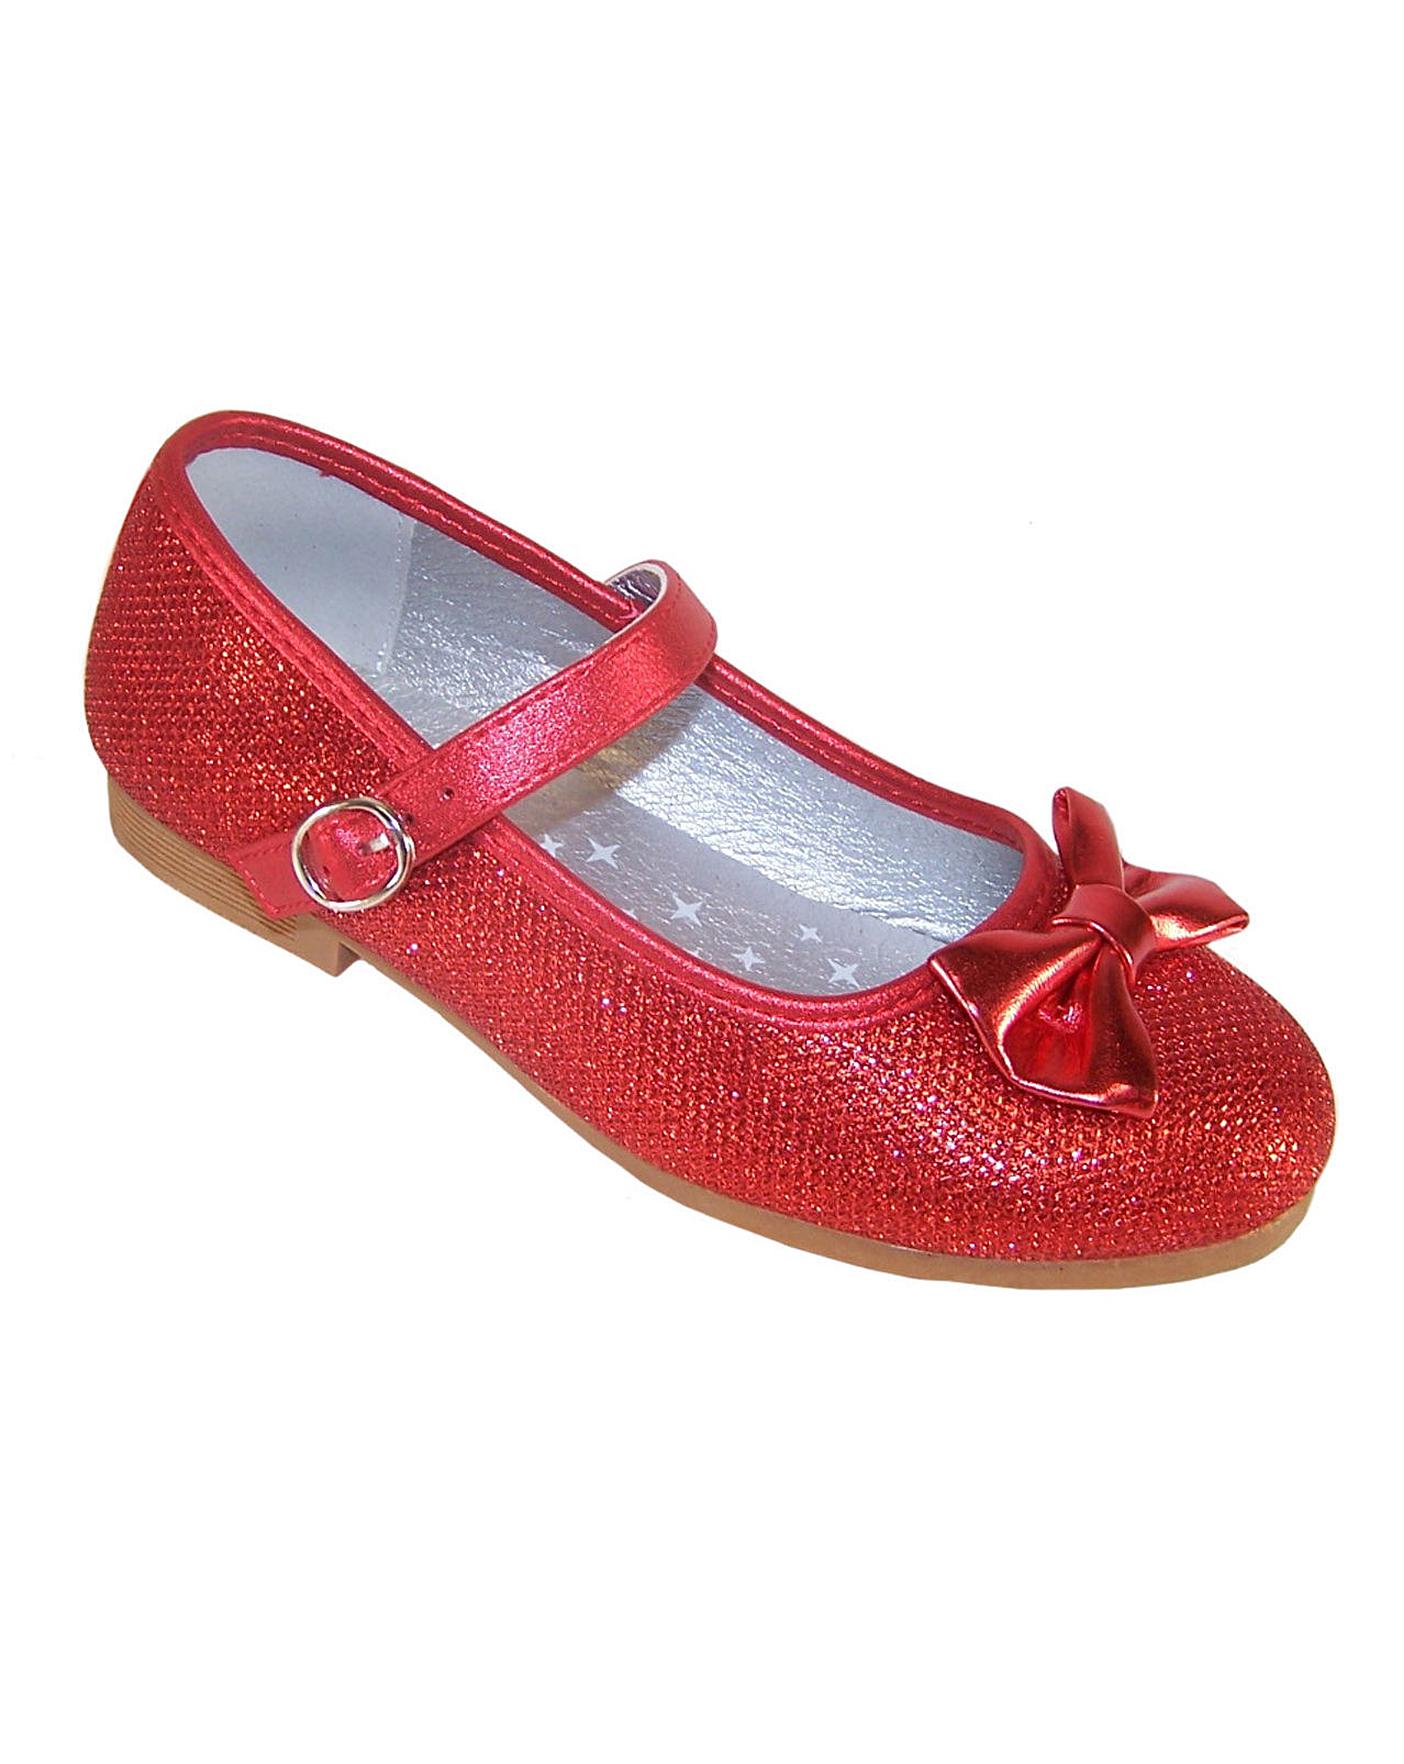 red ballerina shoes